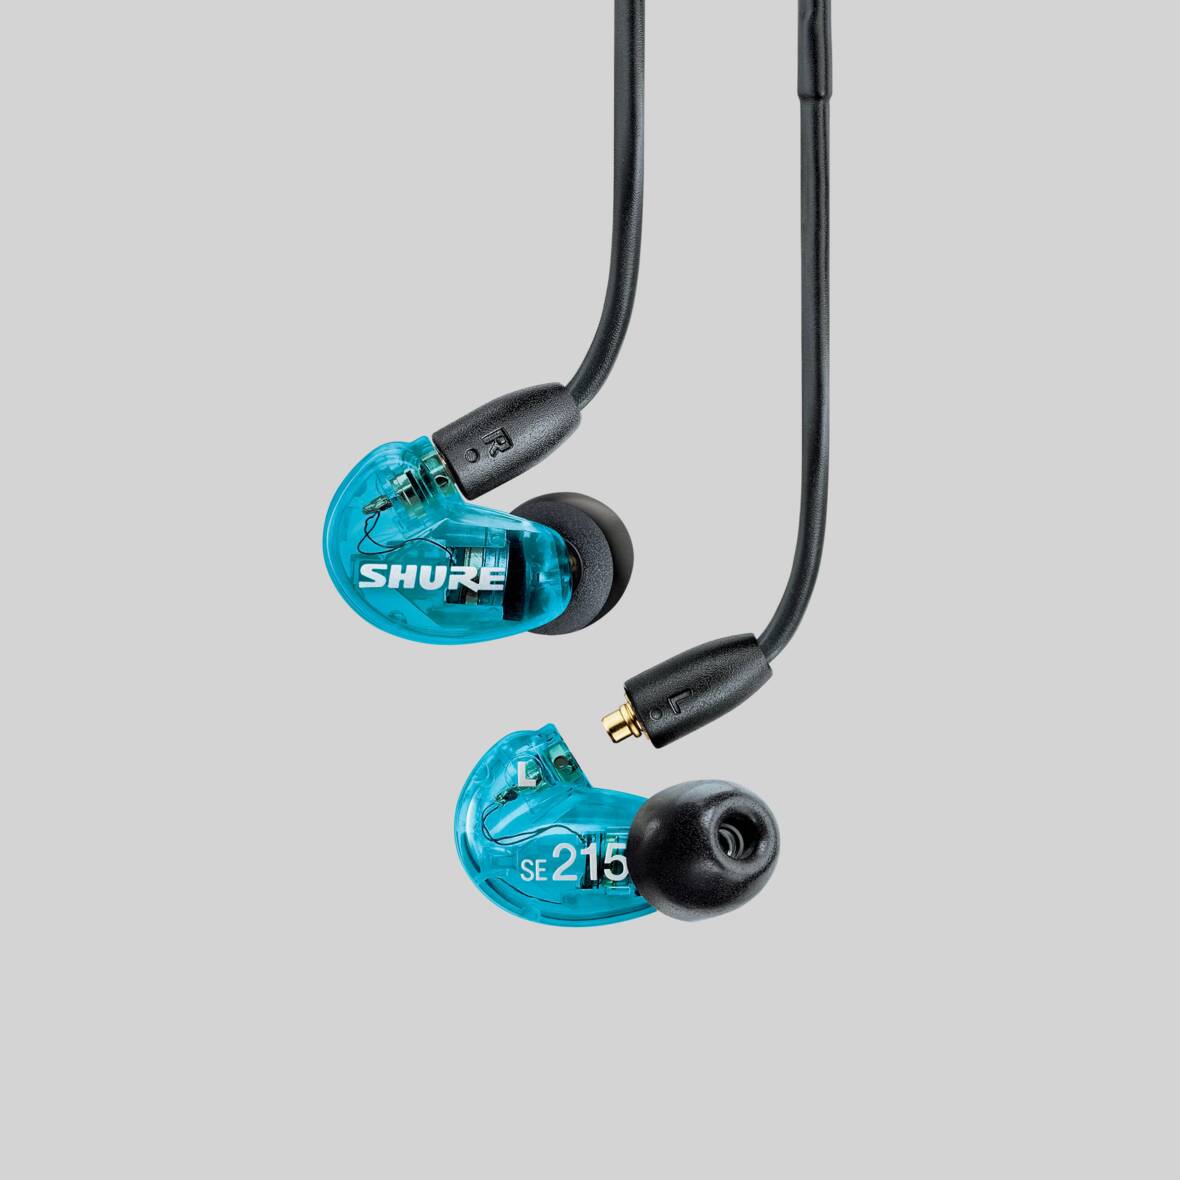 Shure 舒尔| SE215 Special Edition - Sound Isolating™ 隔音耳机 